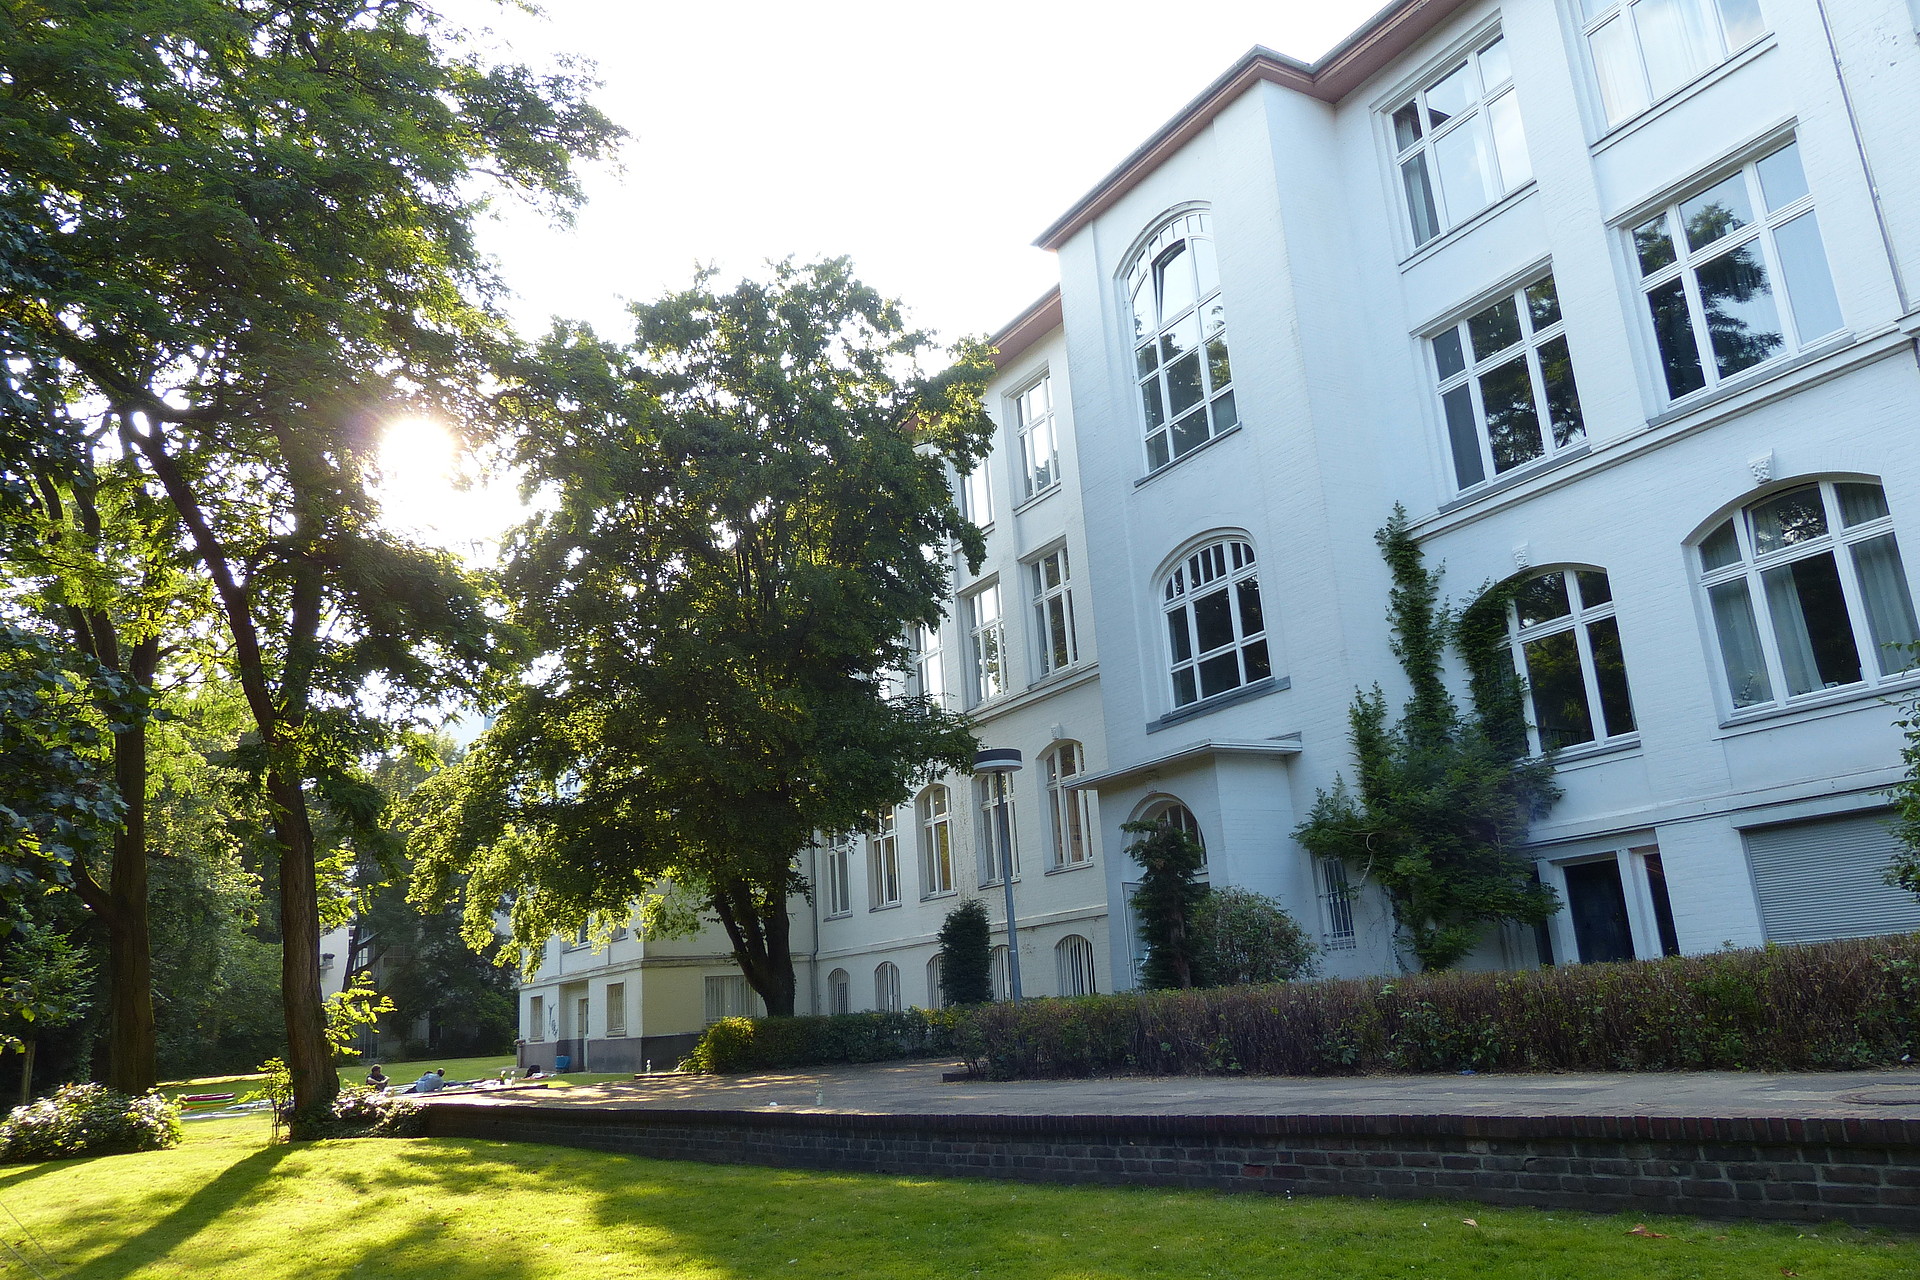 The sun shines through the green trees in a garden in front of the white building of the Armgartstraße Campus